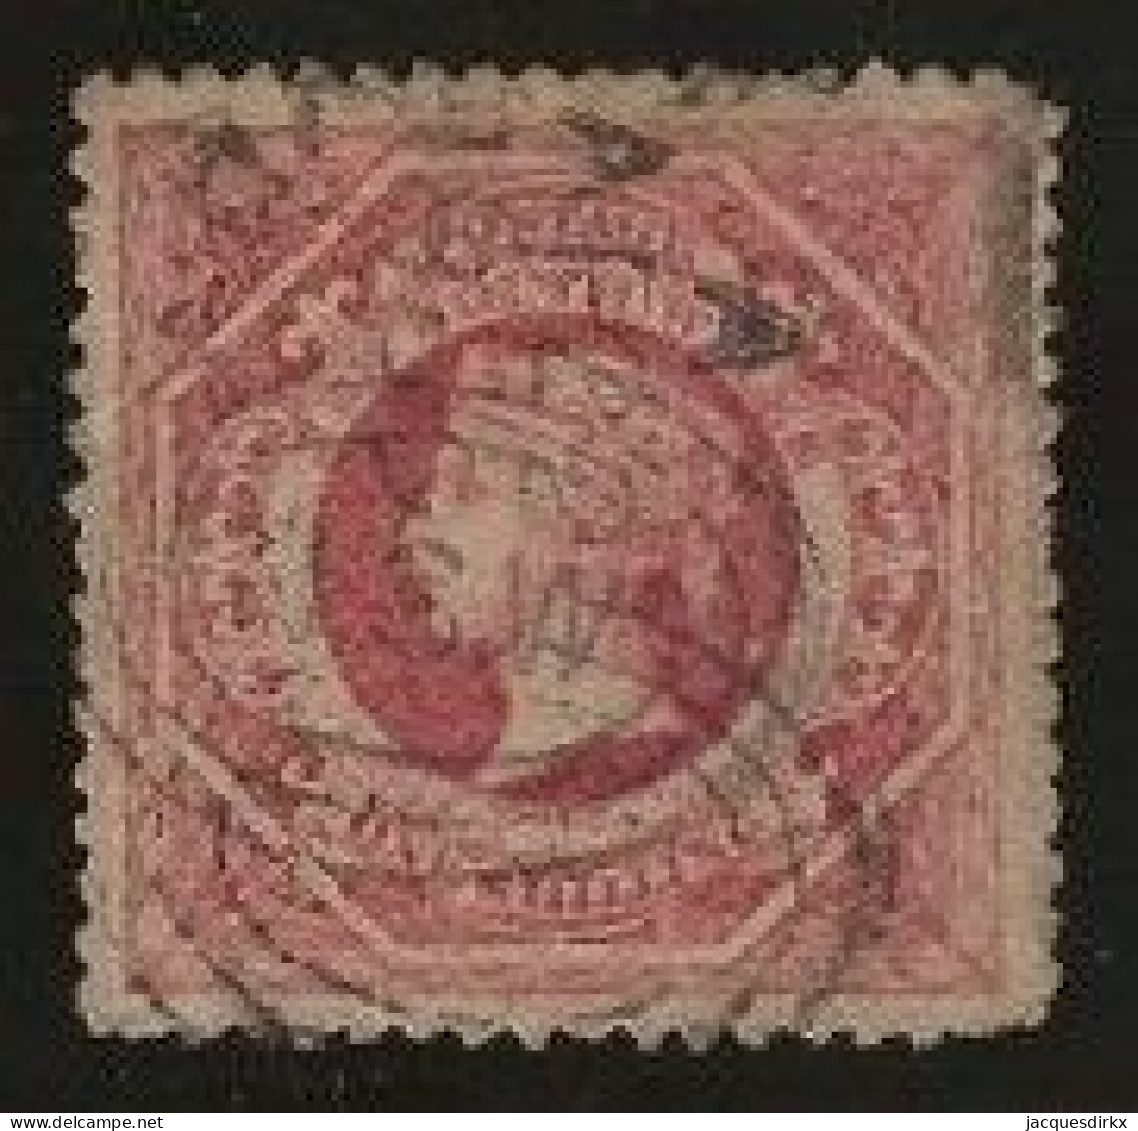 New South Wales      .   SG    .   168       .   O      .     Cancelled - Gebraucht